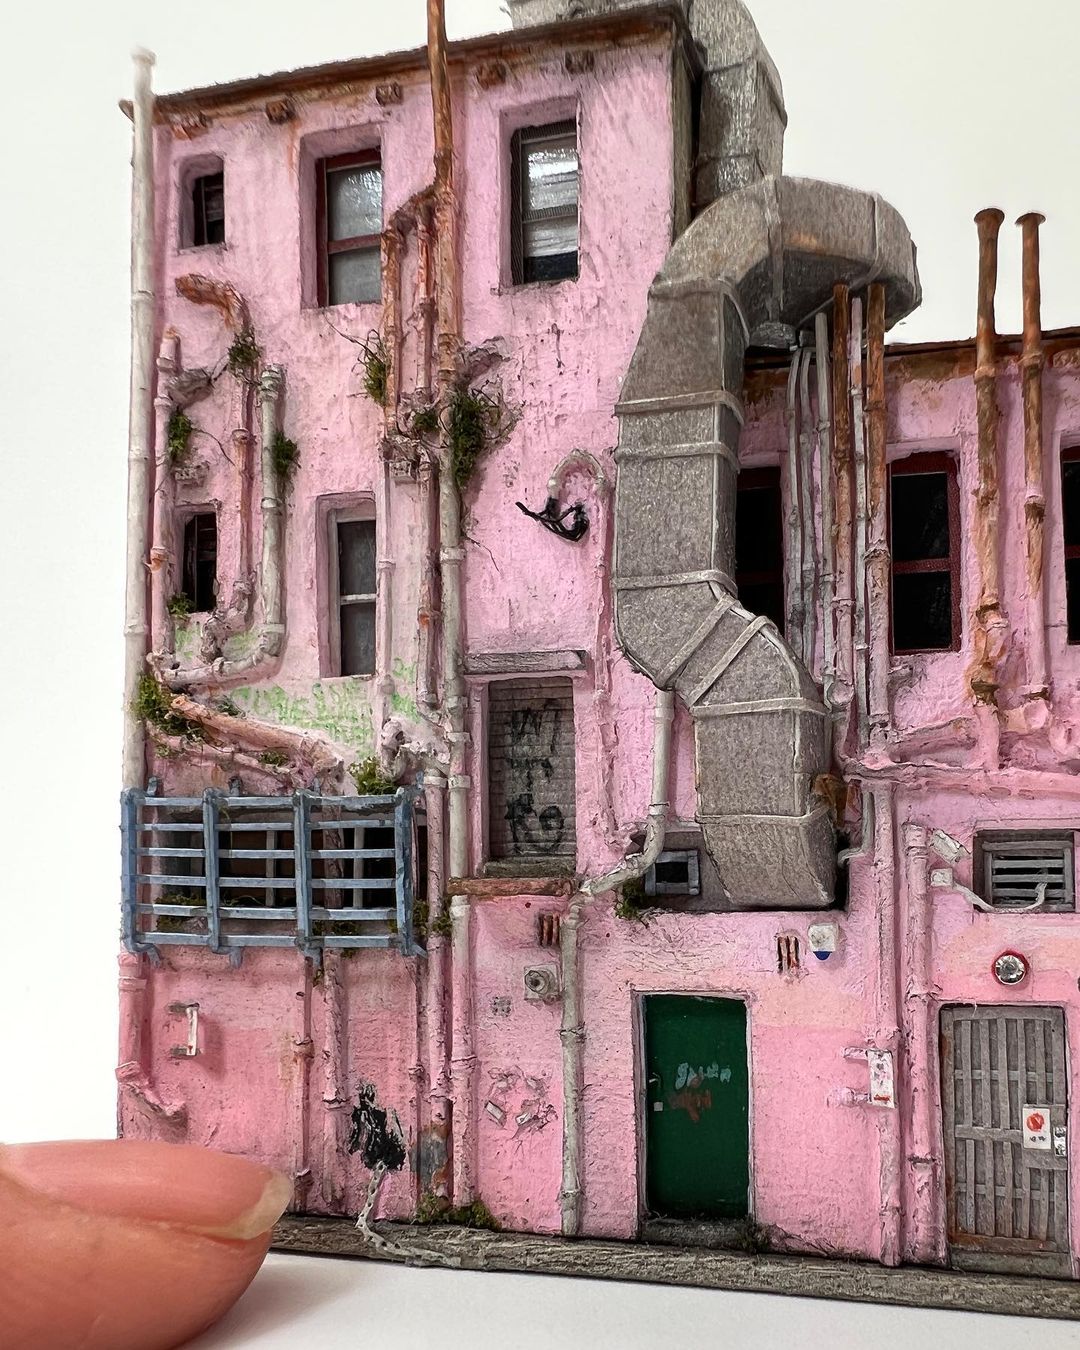 Whimsical Everyday Life And Historical Buildings In Miniature By Mylyn Nguyen (10)